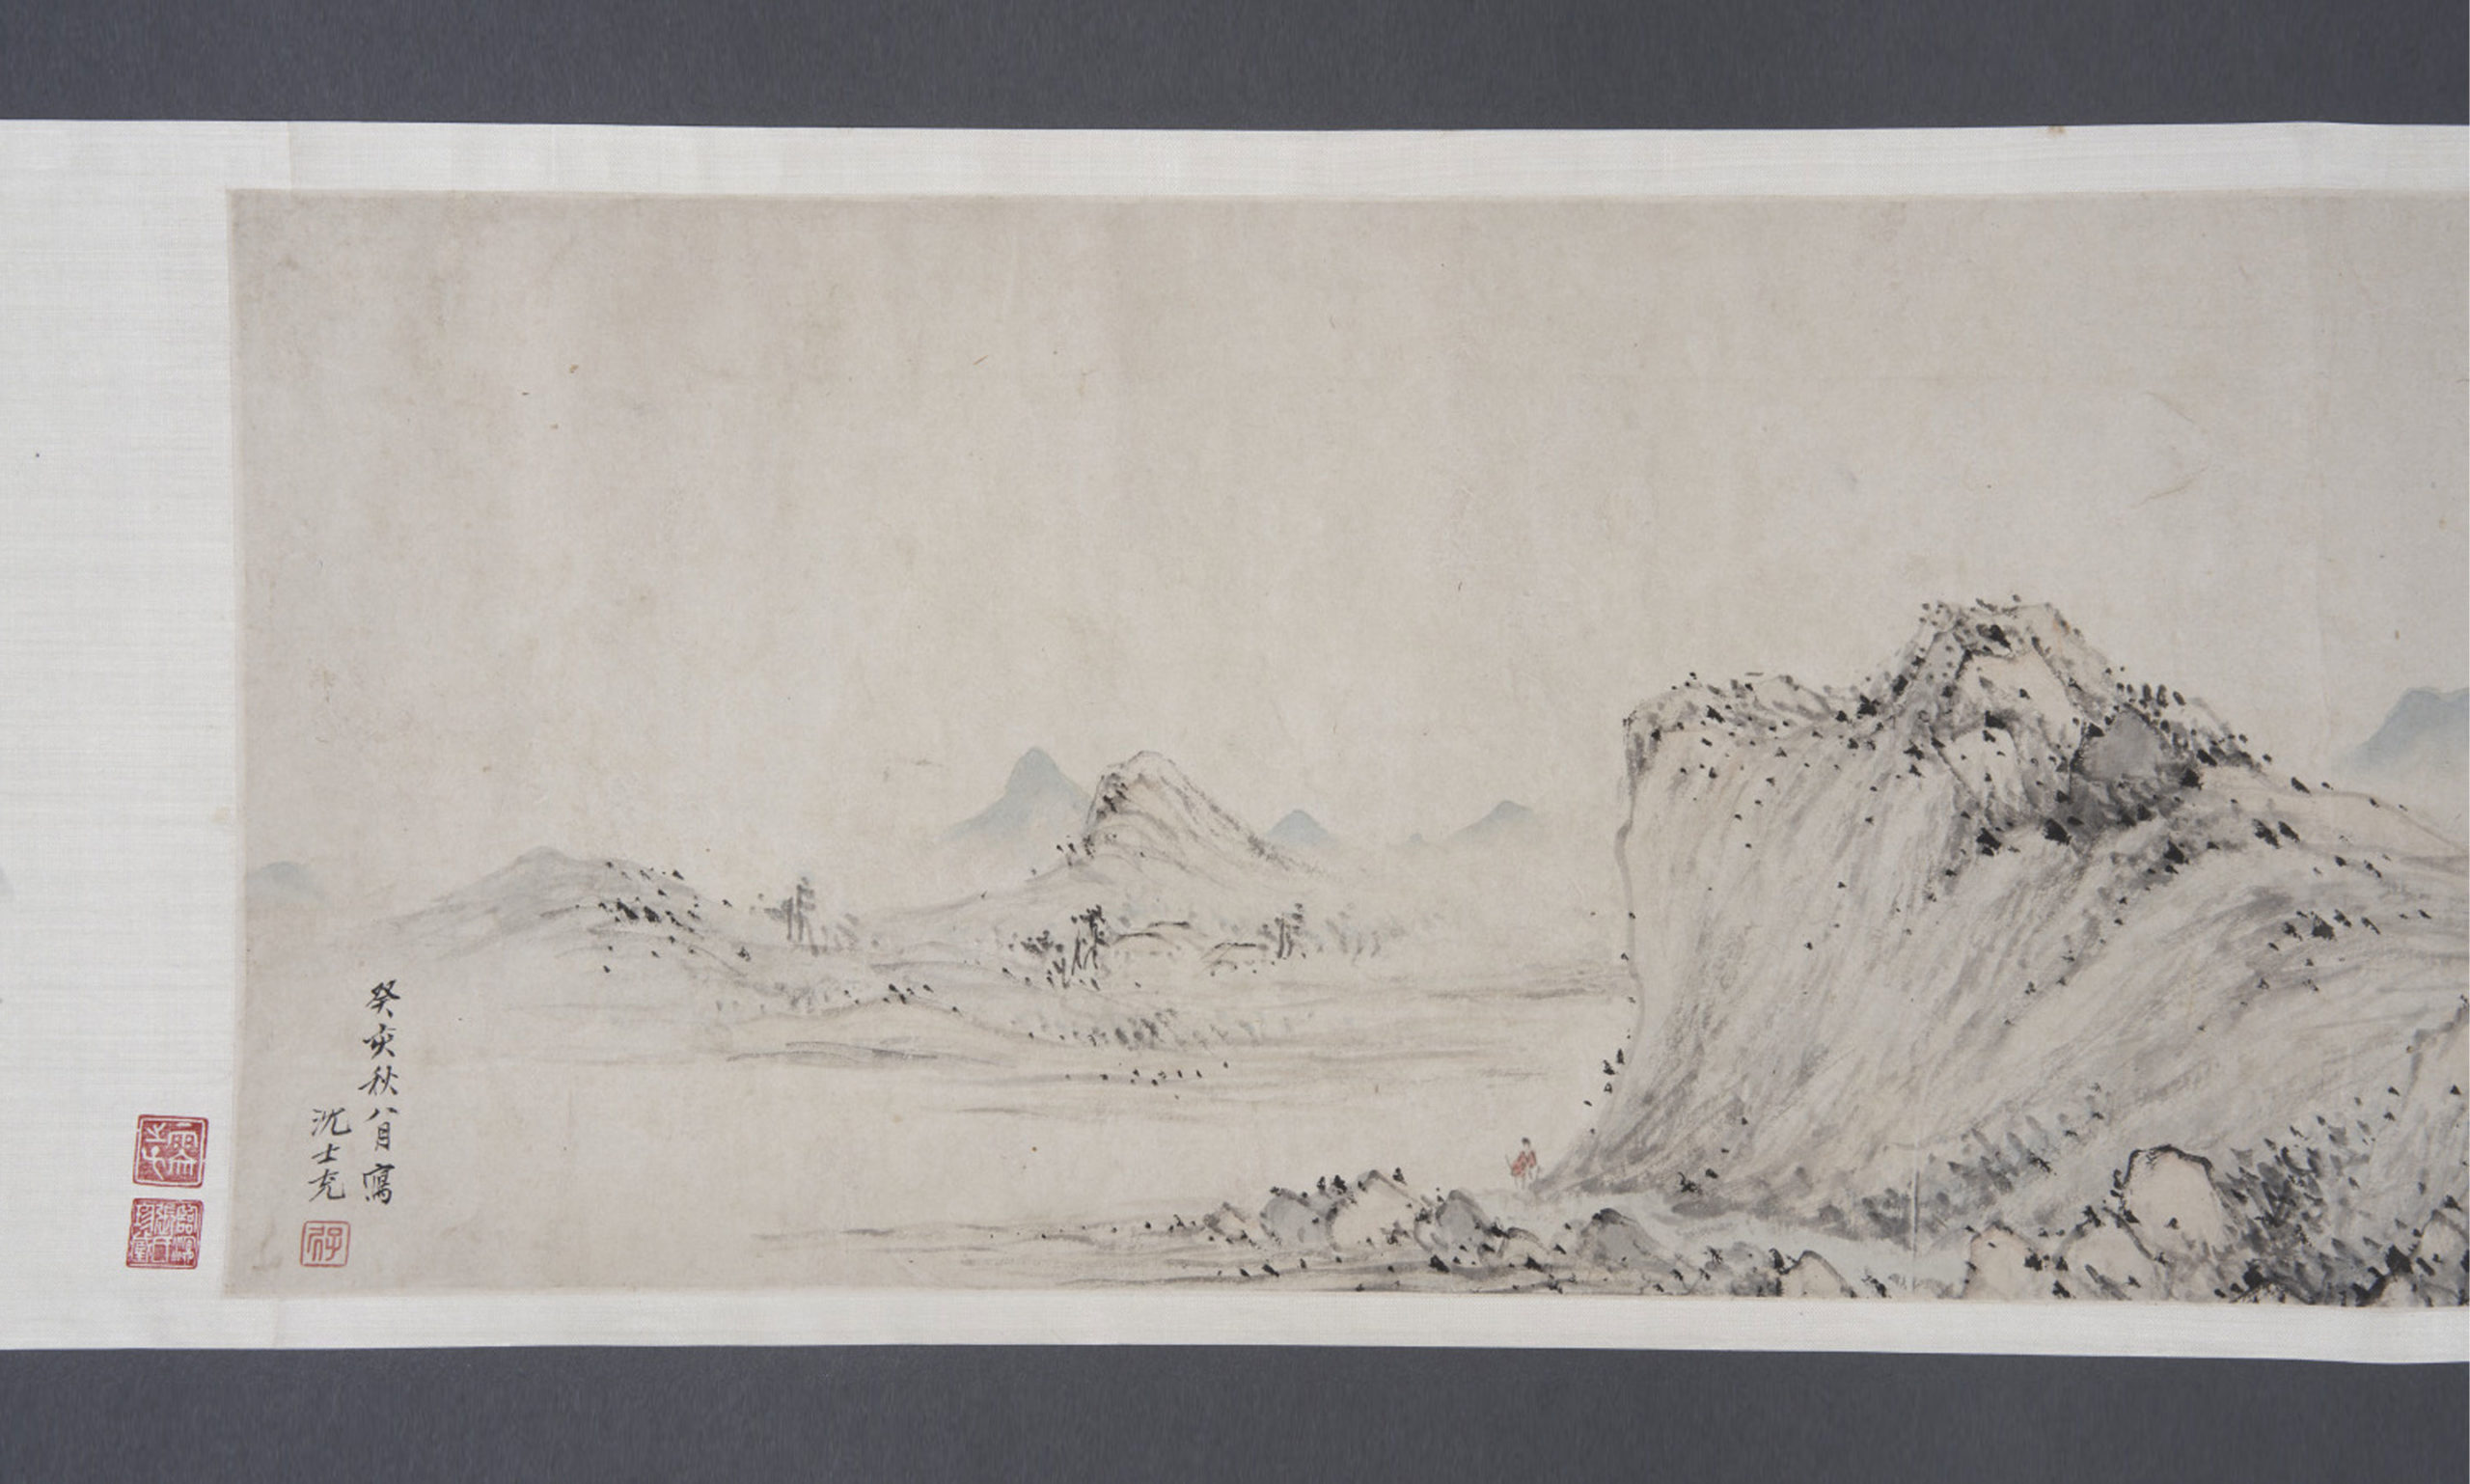 Shen Shichong, Misty Landscape (Paisaje brumoso), 1623. Ink and color on paper. Gift of Papp Family Foundation.